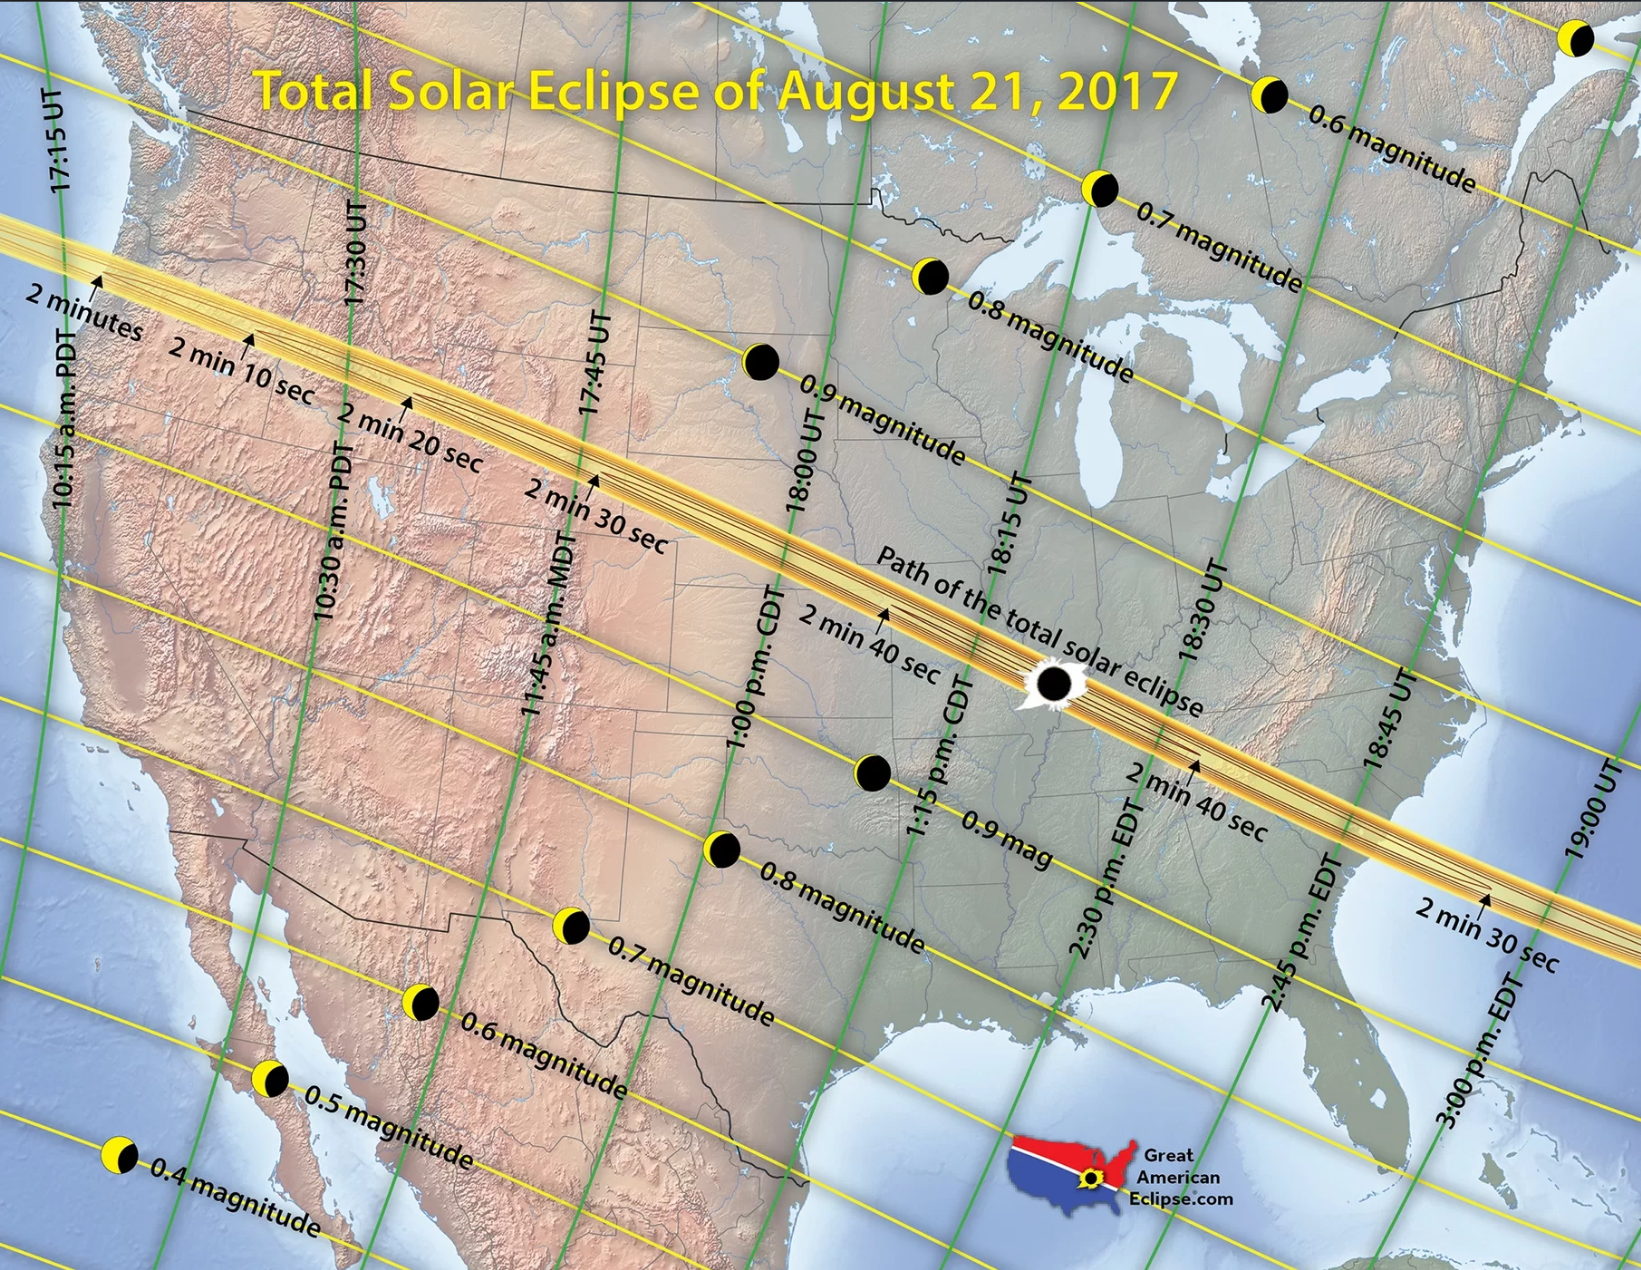 The total solar eclipse of 2017's path of totality, stretching from Oregon to South Carolina.
Credit: Michael Zeiler, GreatAmericanEclipse.com